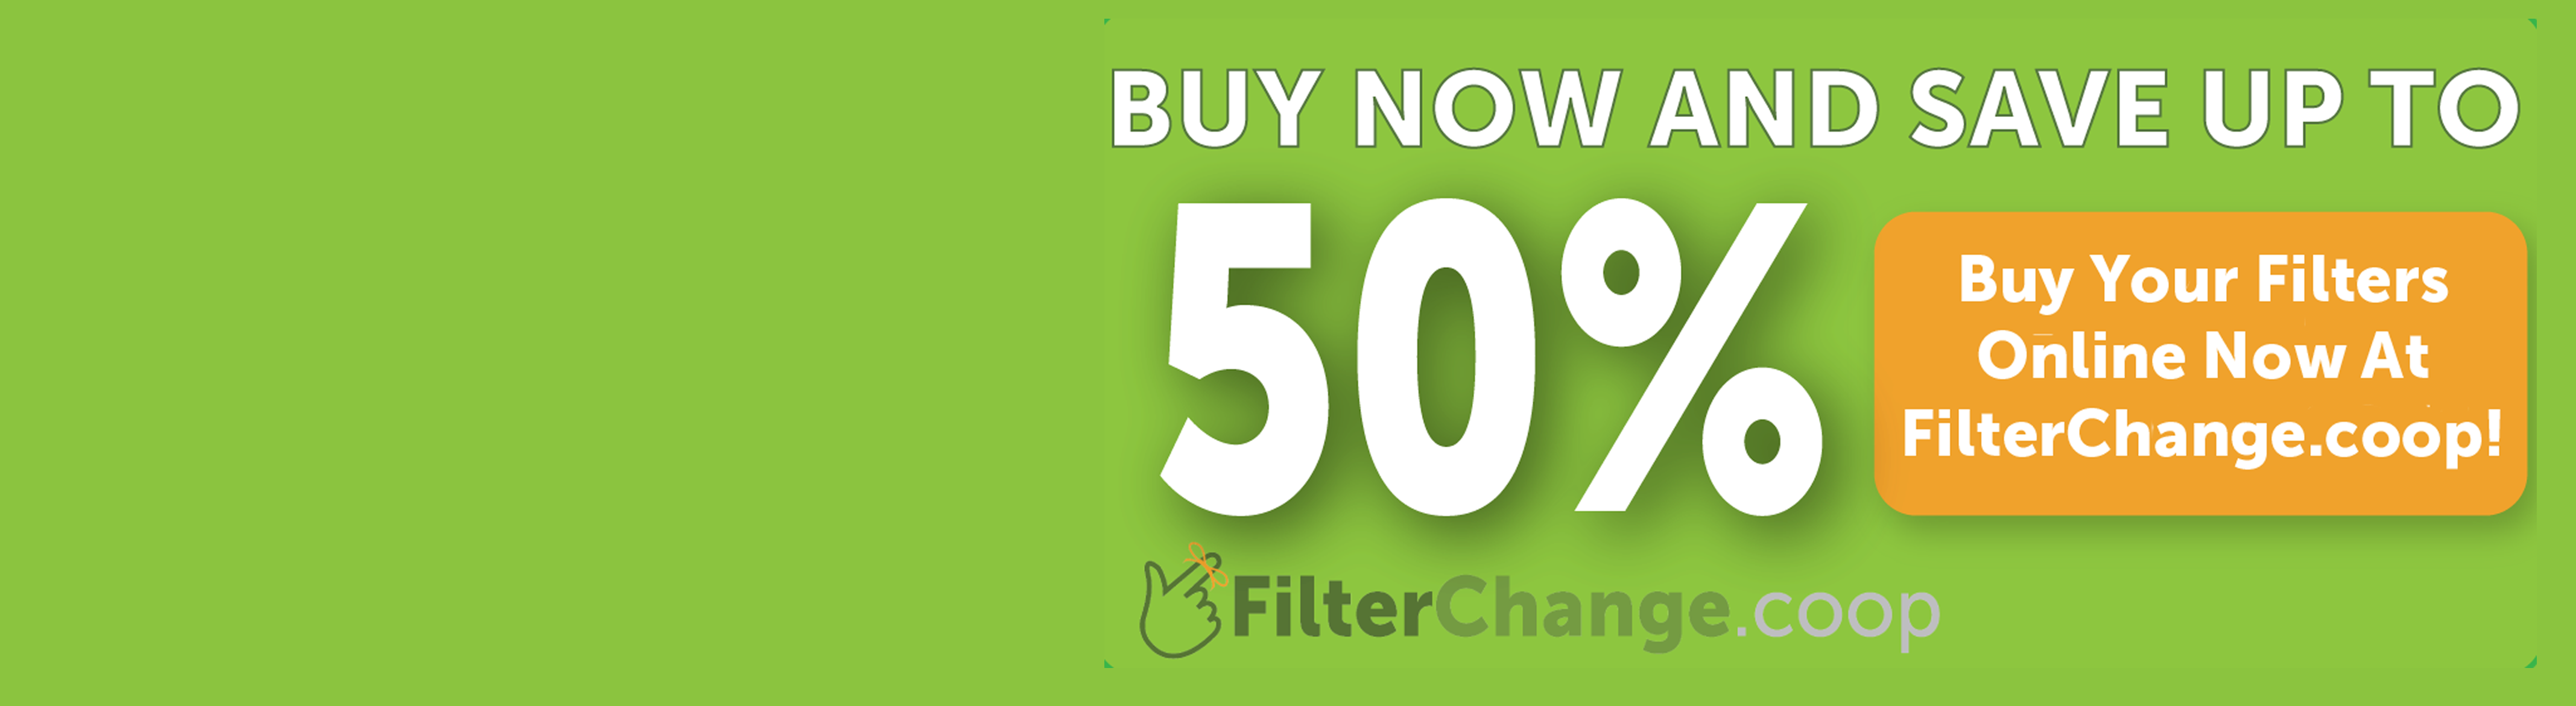 Save up to 50% on Filters